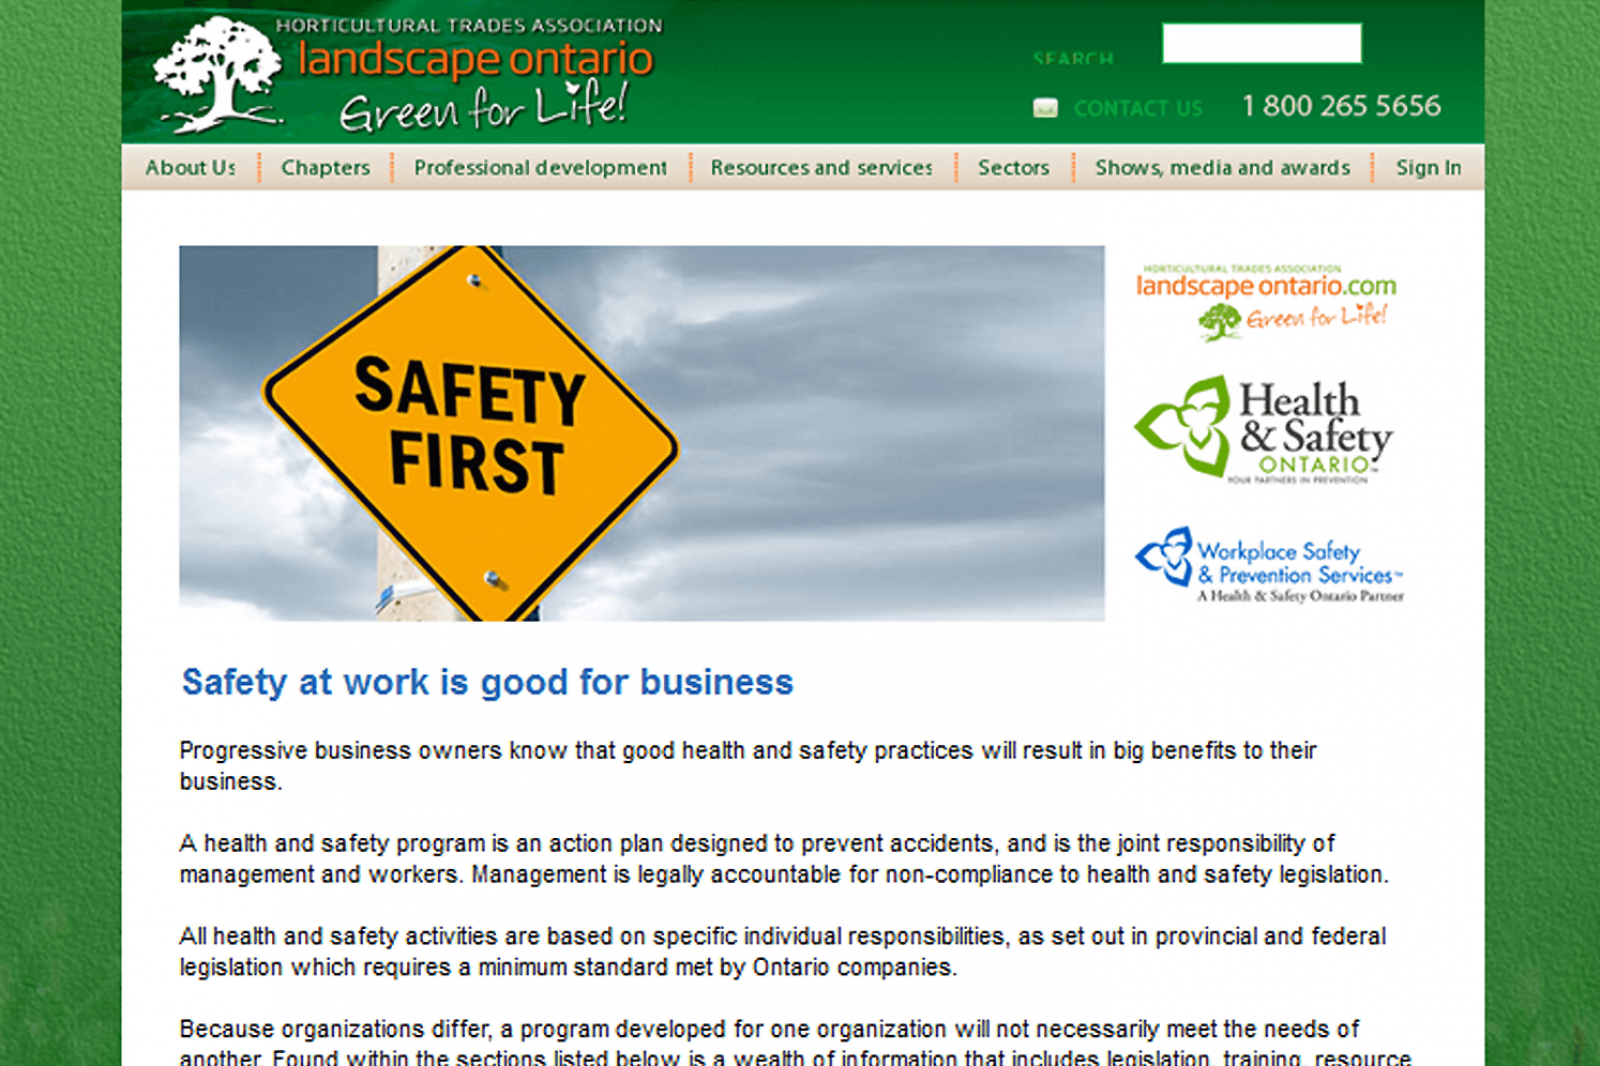 Association has proud record of promoting safe work practices